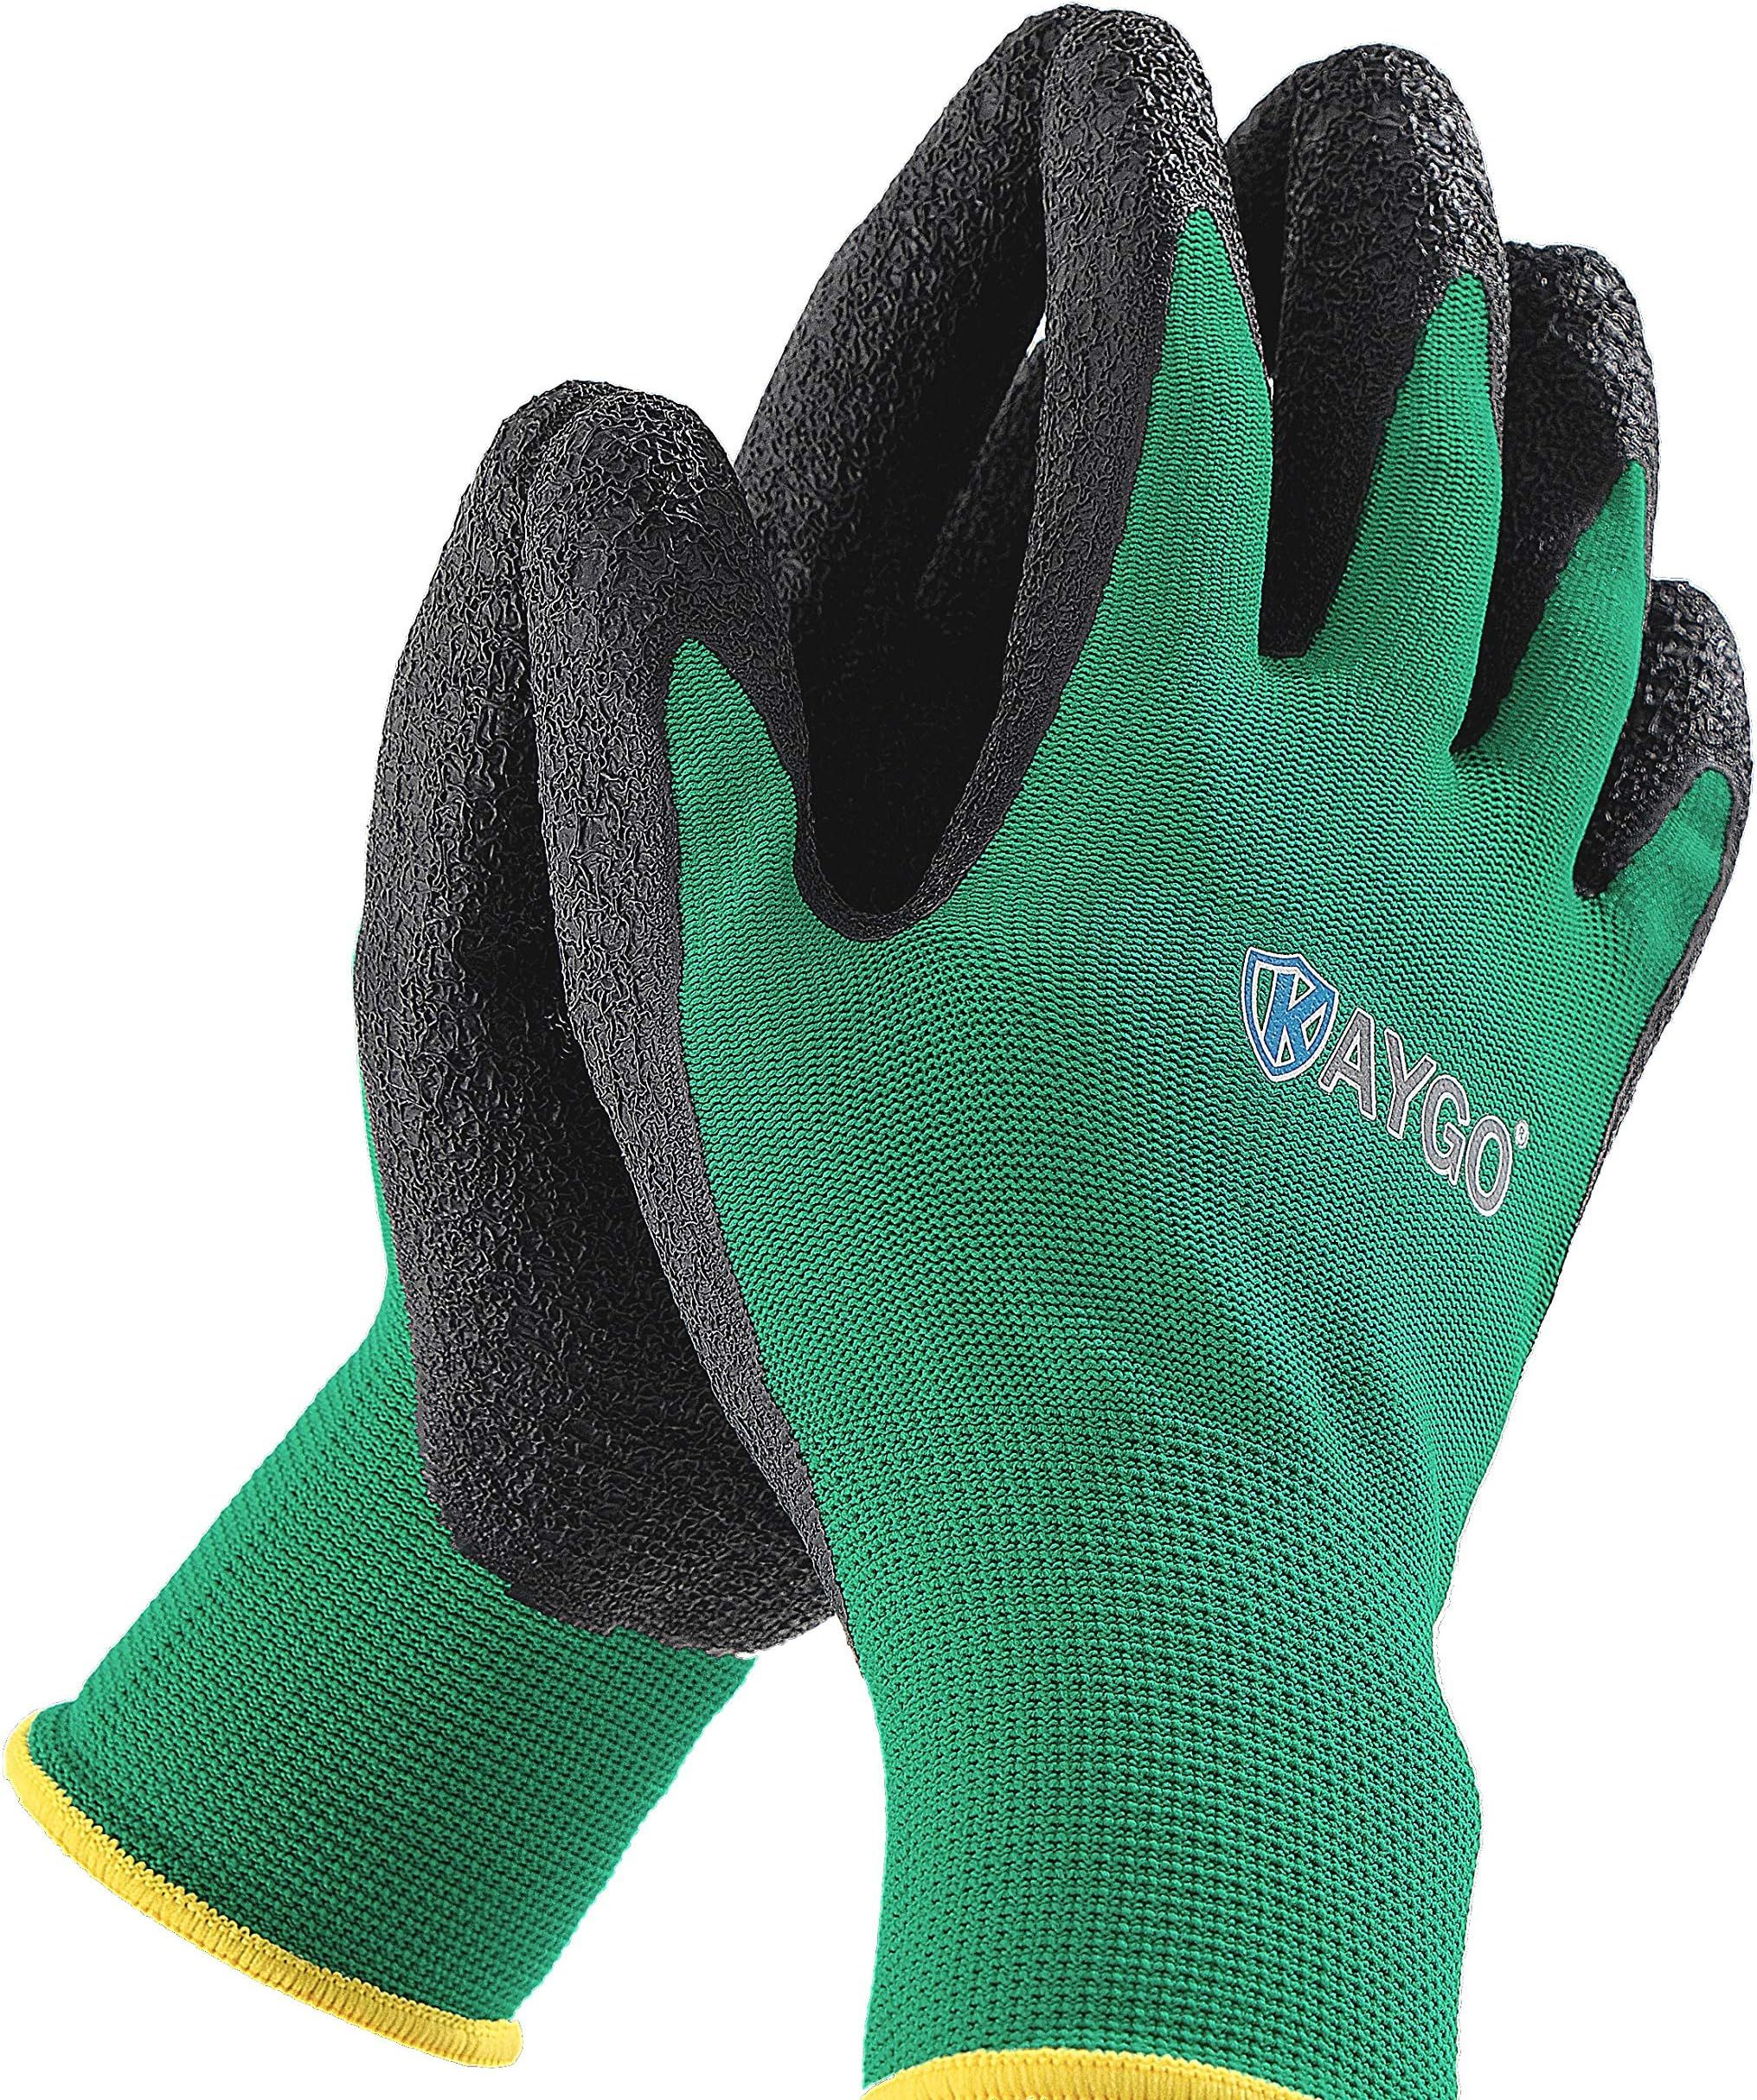 Gardening Gloves for Women and Men - 3 Pairs Breathable Latex Textured Coated Garden Gloves, KAYG... | Amazon (US)